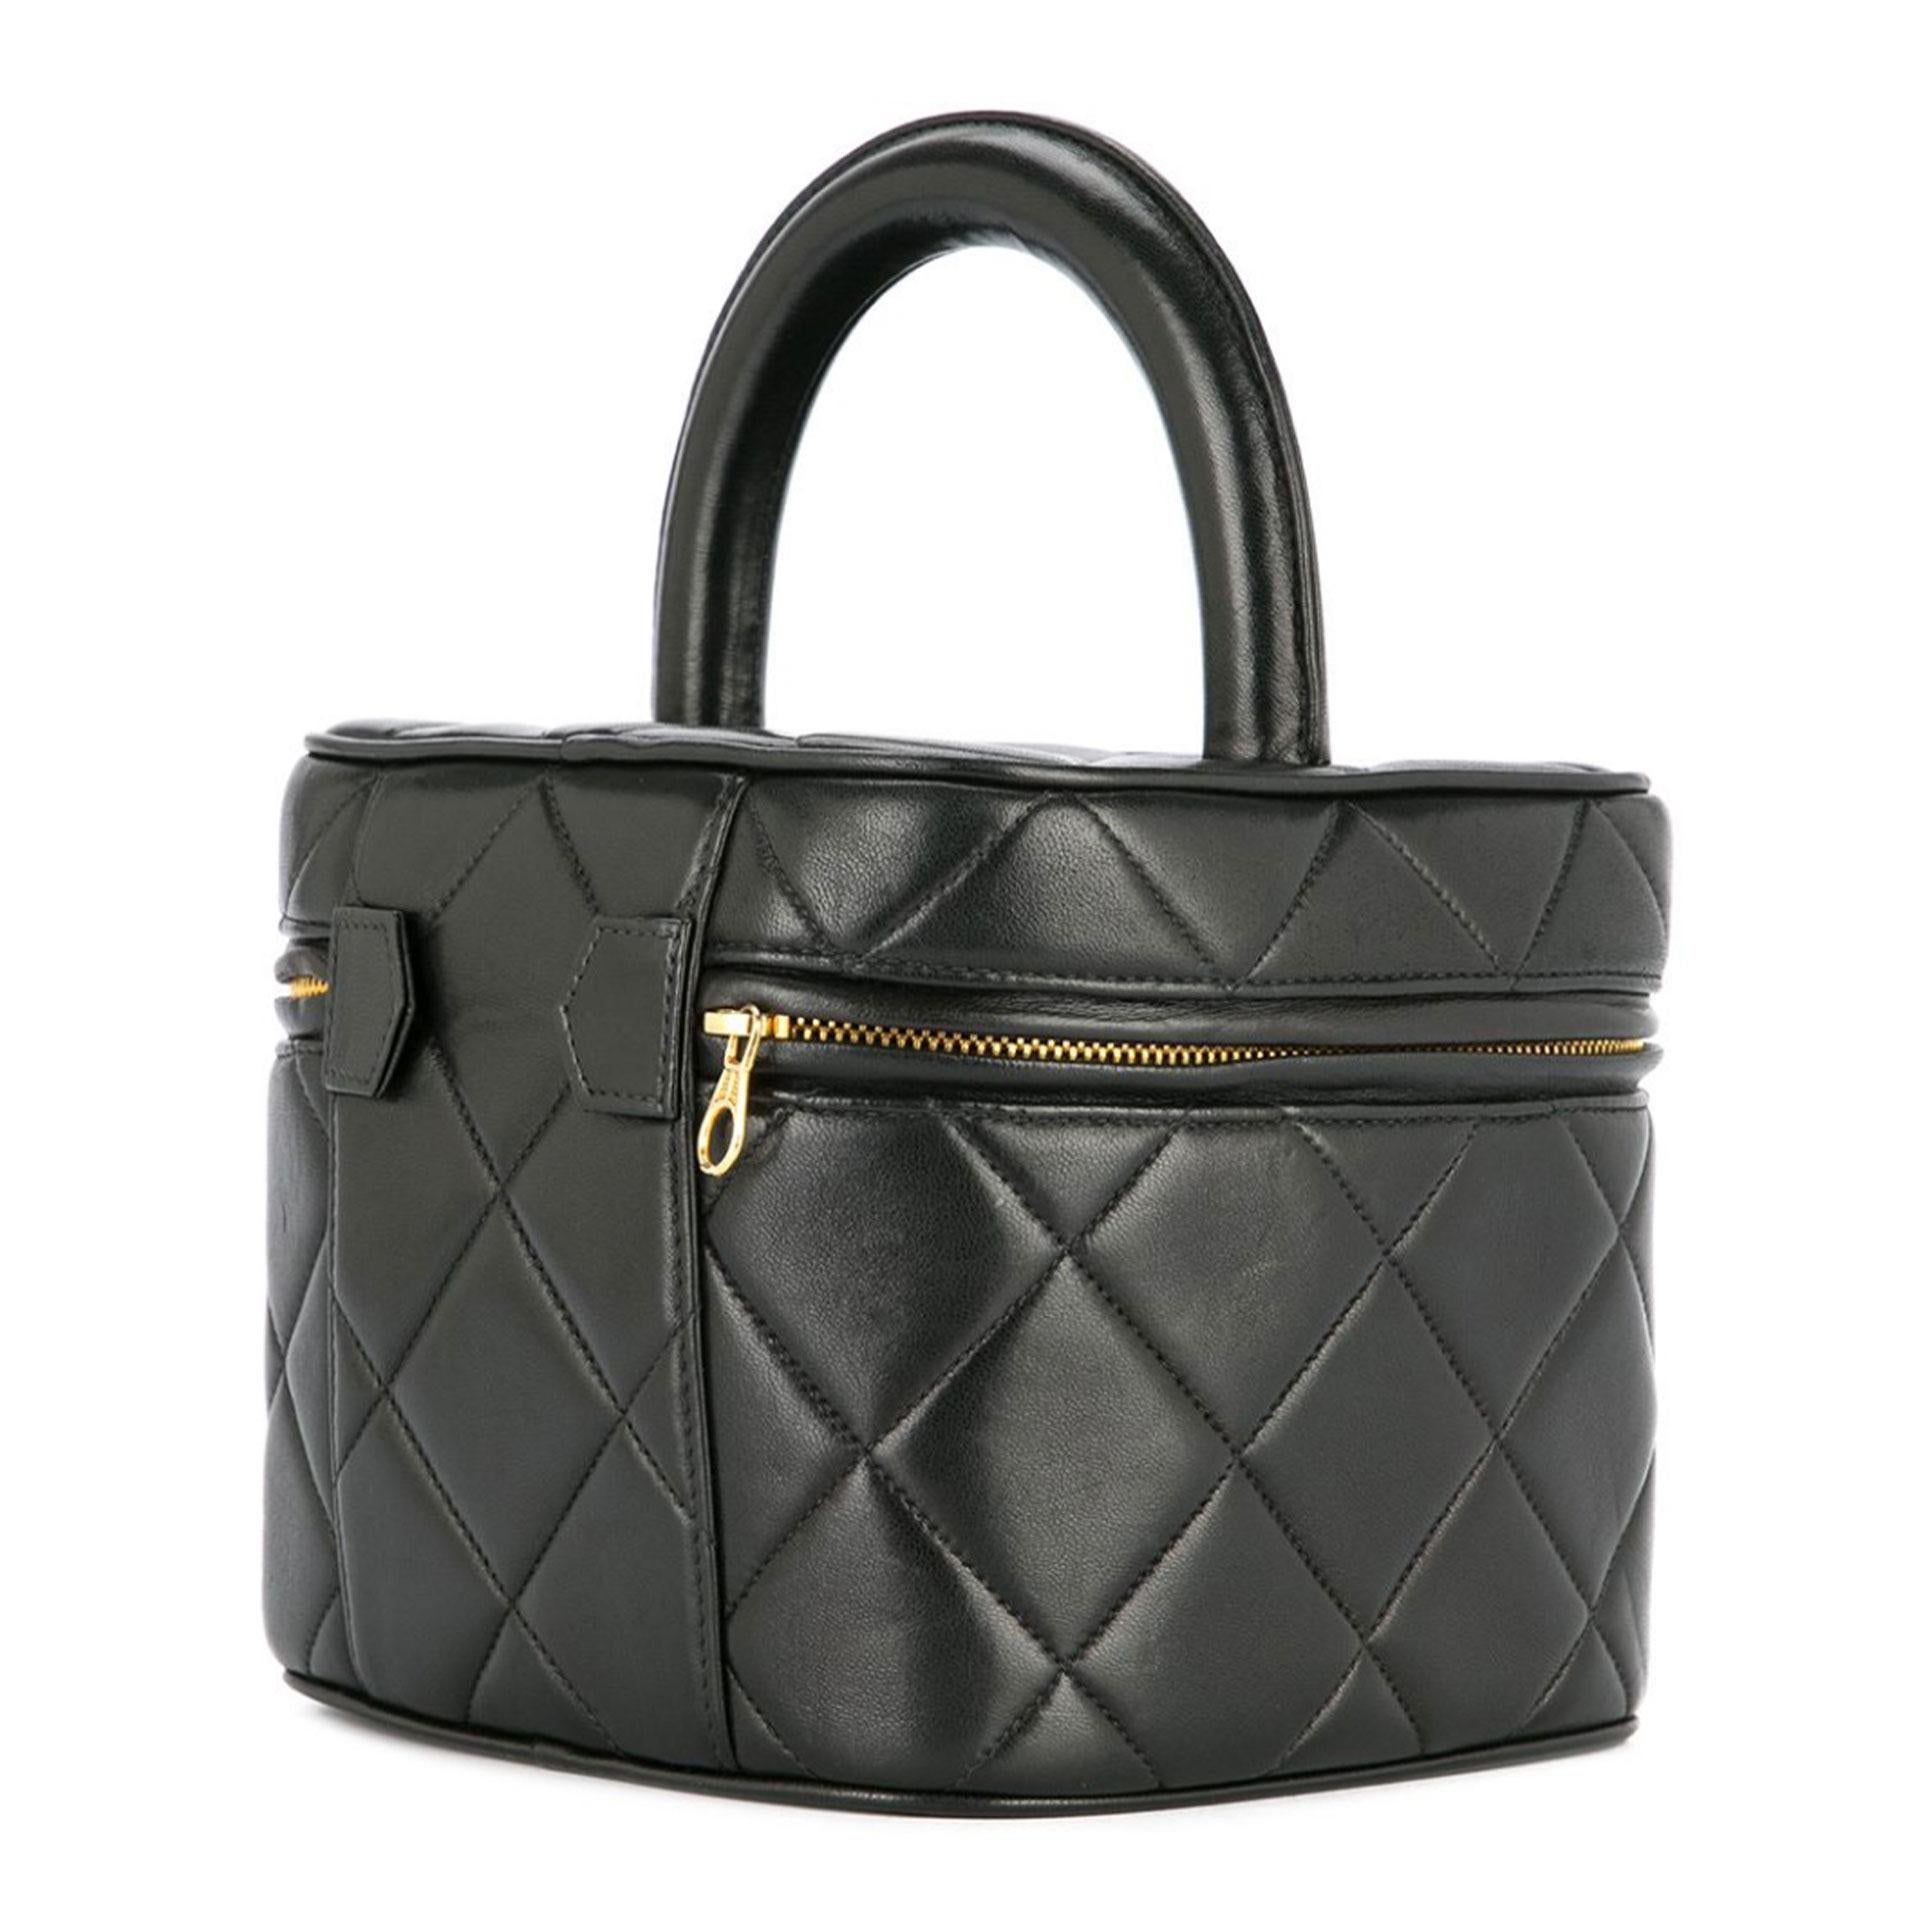 Chanel Vintage Quilted Top Handle Black Cosmetic & Jewelry Hand Bag Vanity

This gorgeous hand bag was crafted from diamond quilted black leather. This vanity also features a round top handle, an all around zip fastening, a main internal